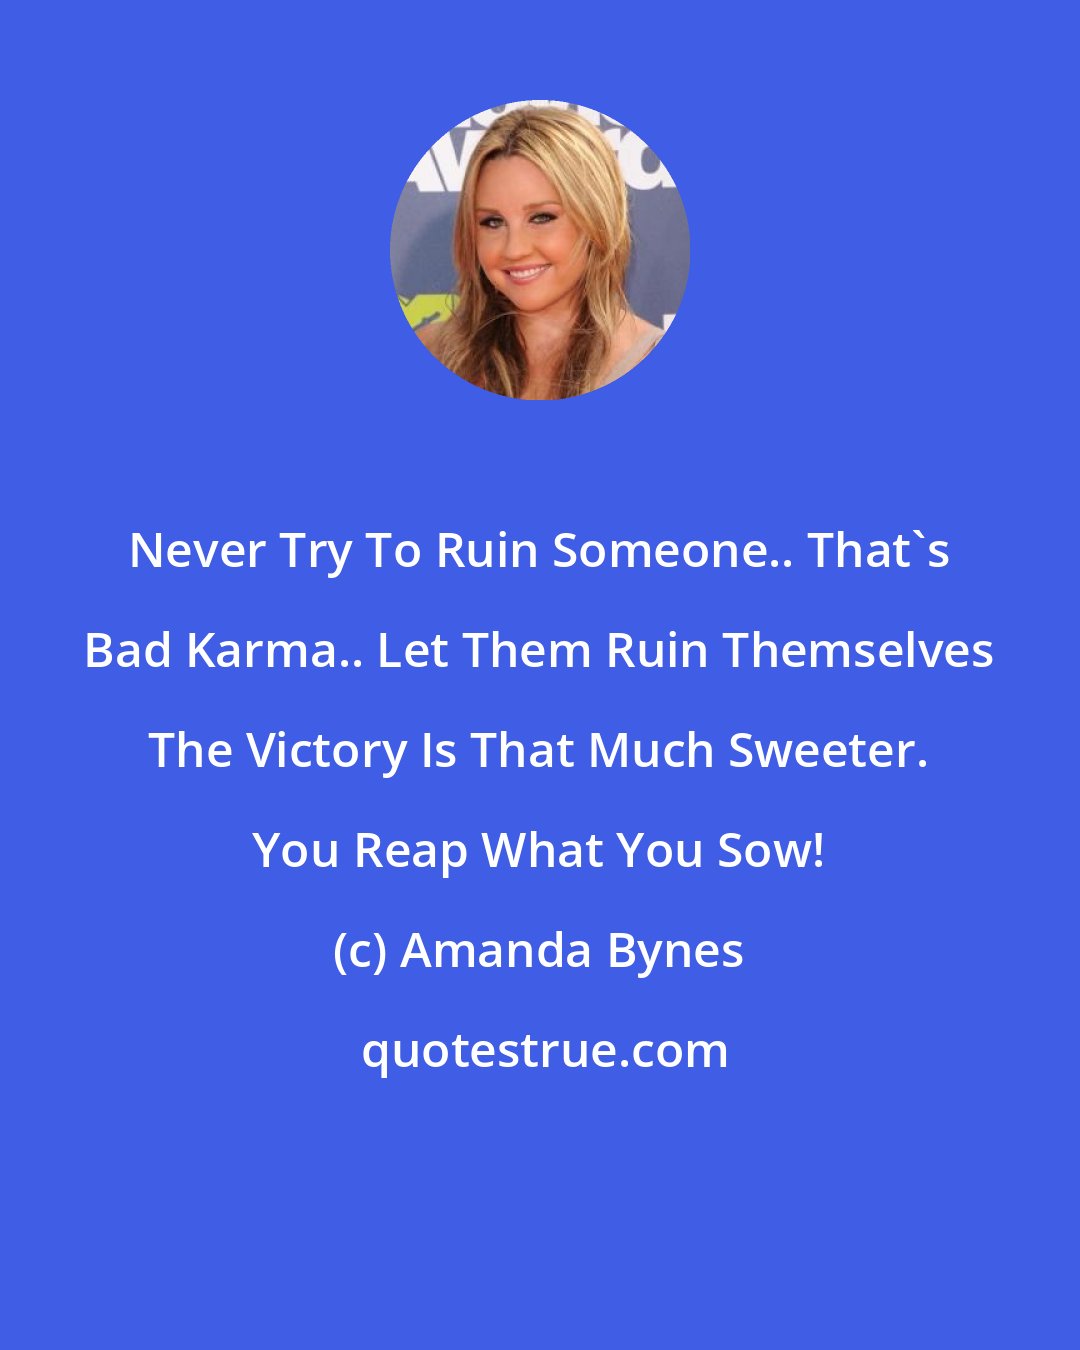 Amanda Bynes: Never Try To Ruin Someone.. That's Bad Karma.. Let Them Ruin Themselves The Victory Is That Much Sweeter. You Reap What You Sow!